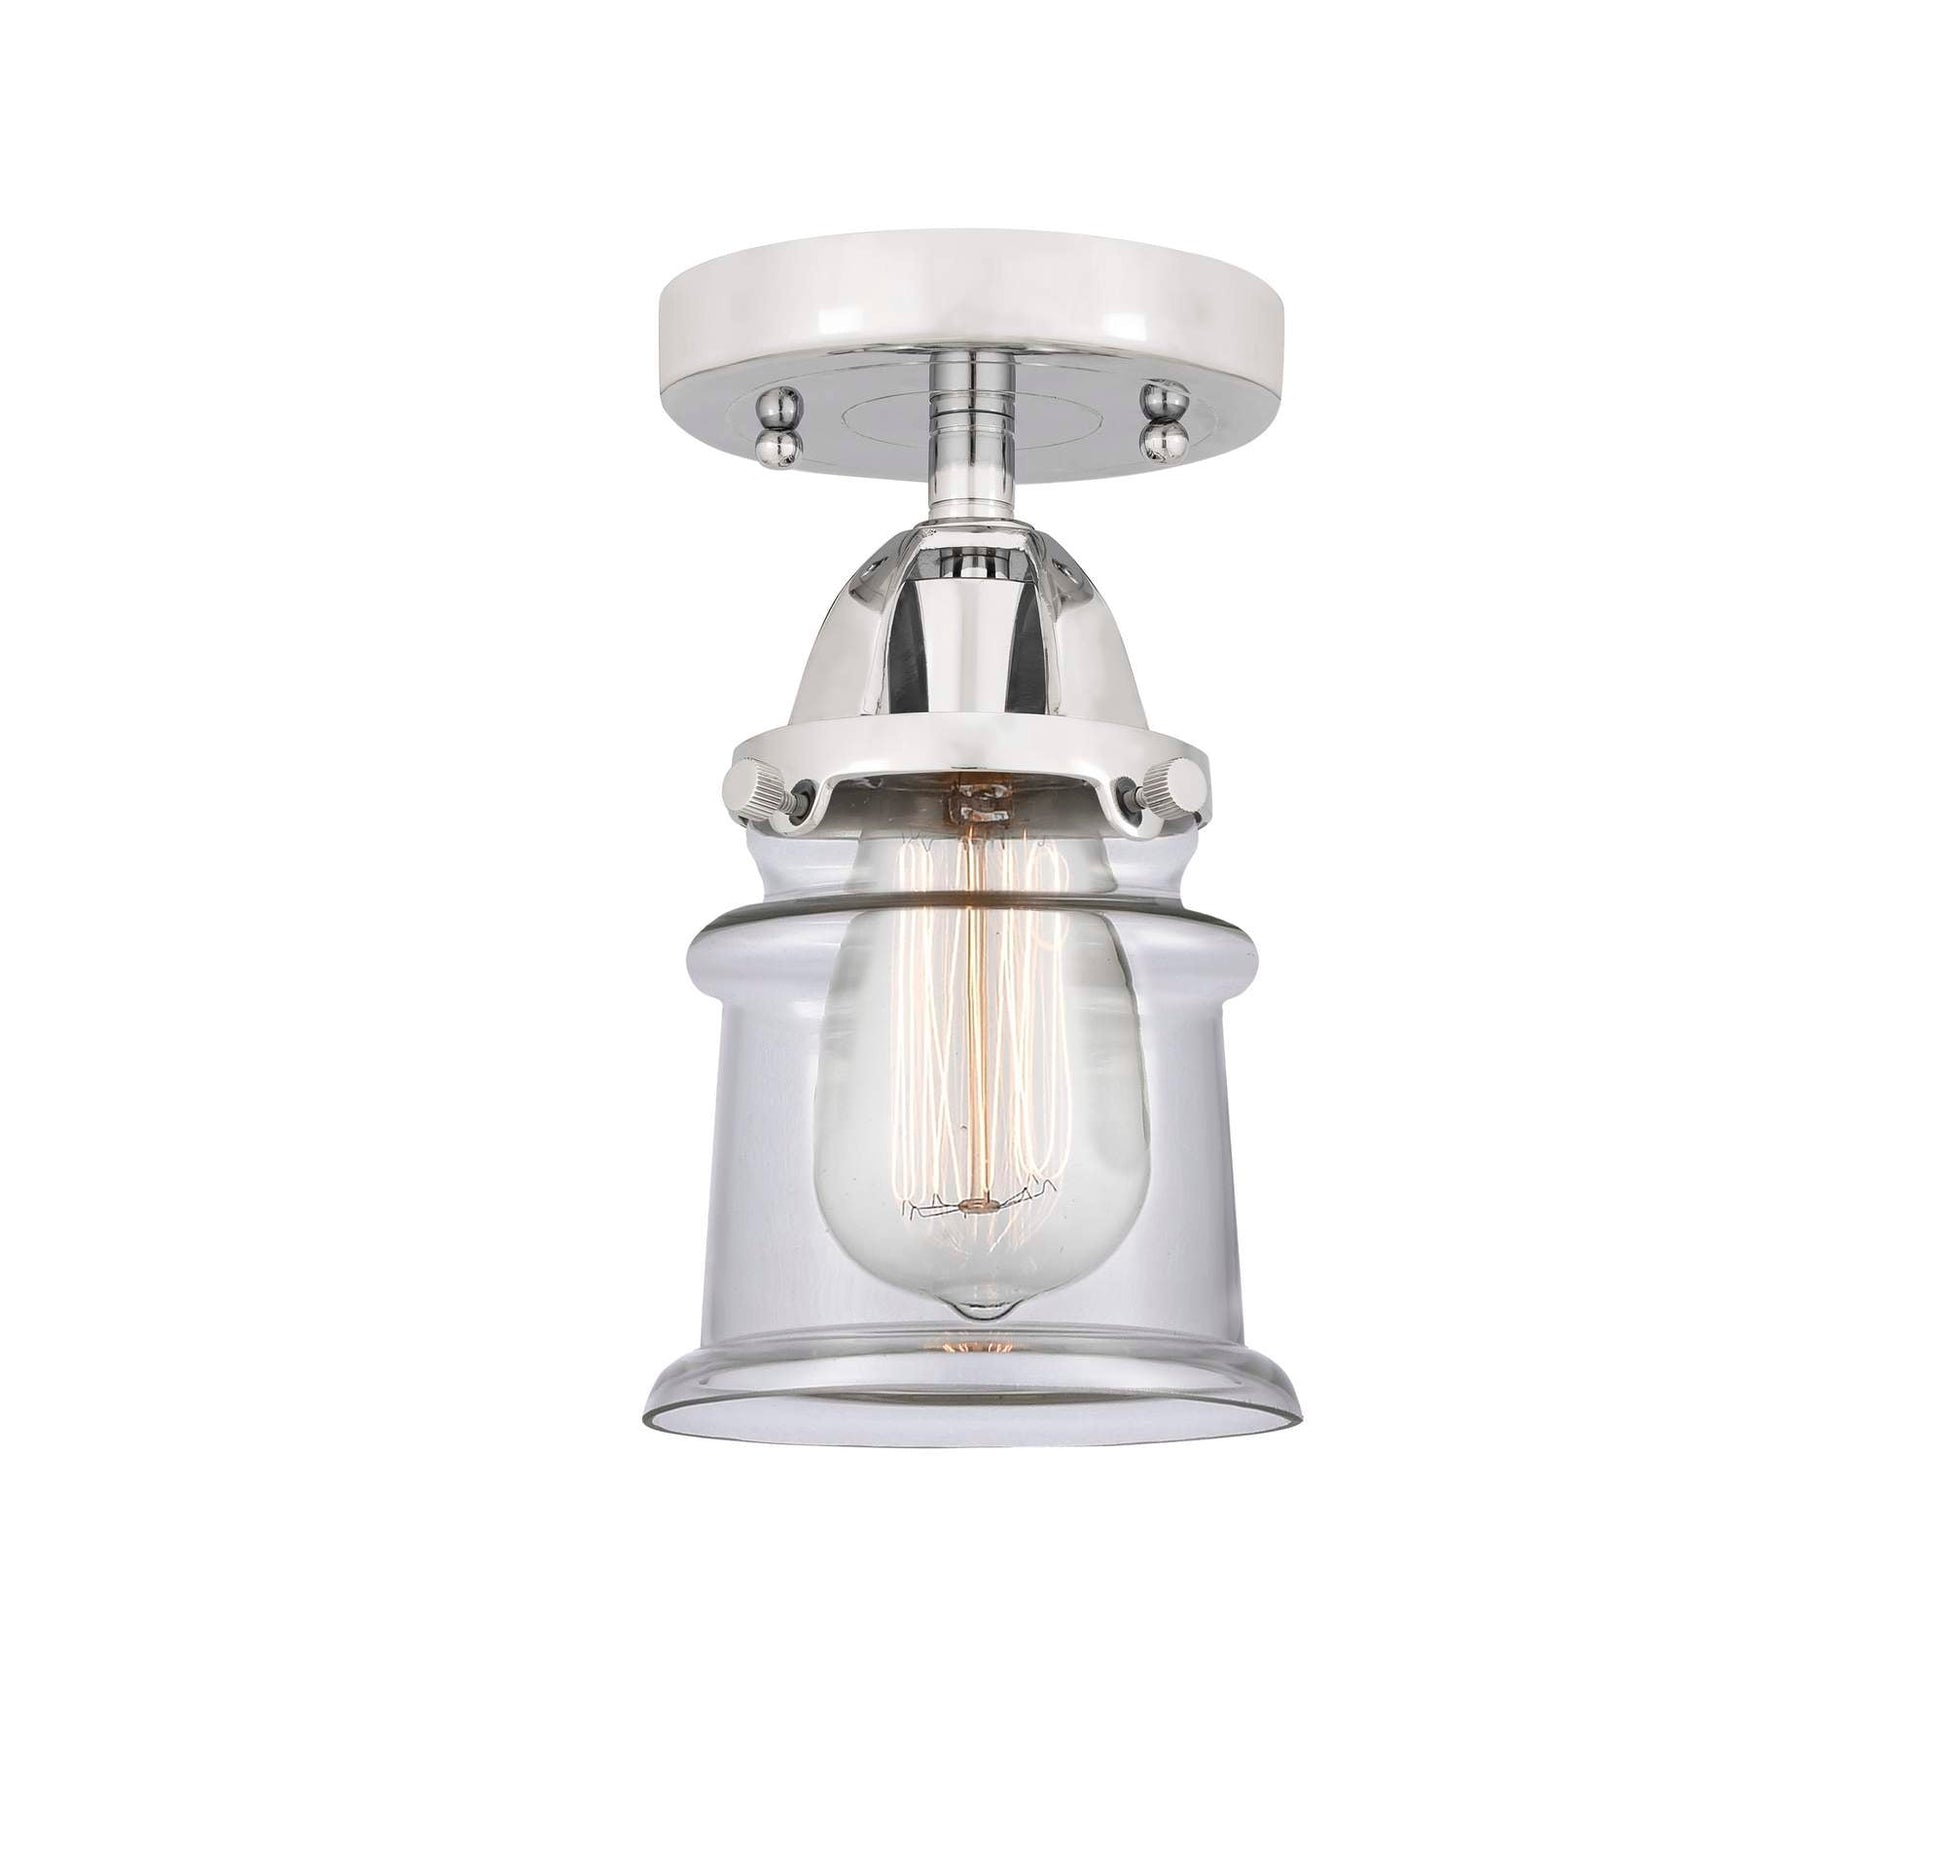 288-1C-PC-G182S 1-Light 5.25" Polished Chrome Semi-Flush Mount - Clear Small Canton Glass - LED Bulb - Dimmensions: 5.25 x 5.25 x 9 - Sloped Ceiling Compatible: No